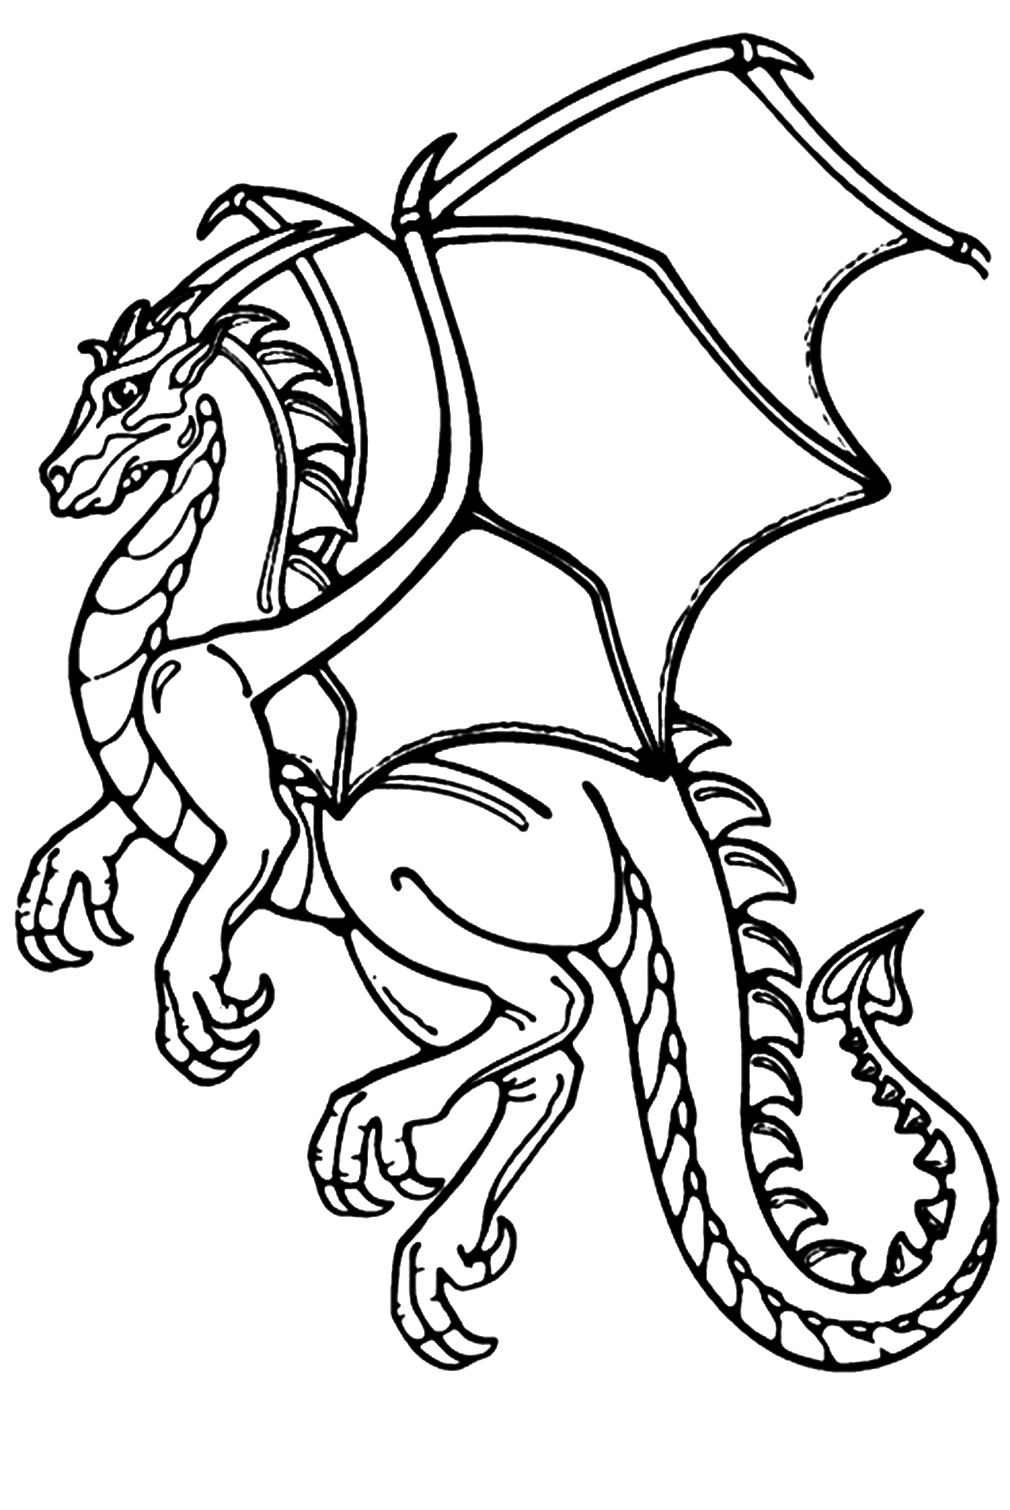 Medieval Dragon Coloring Pages